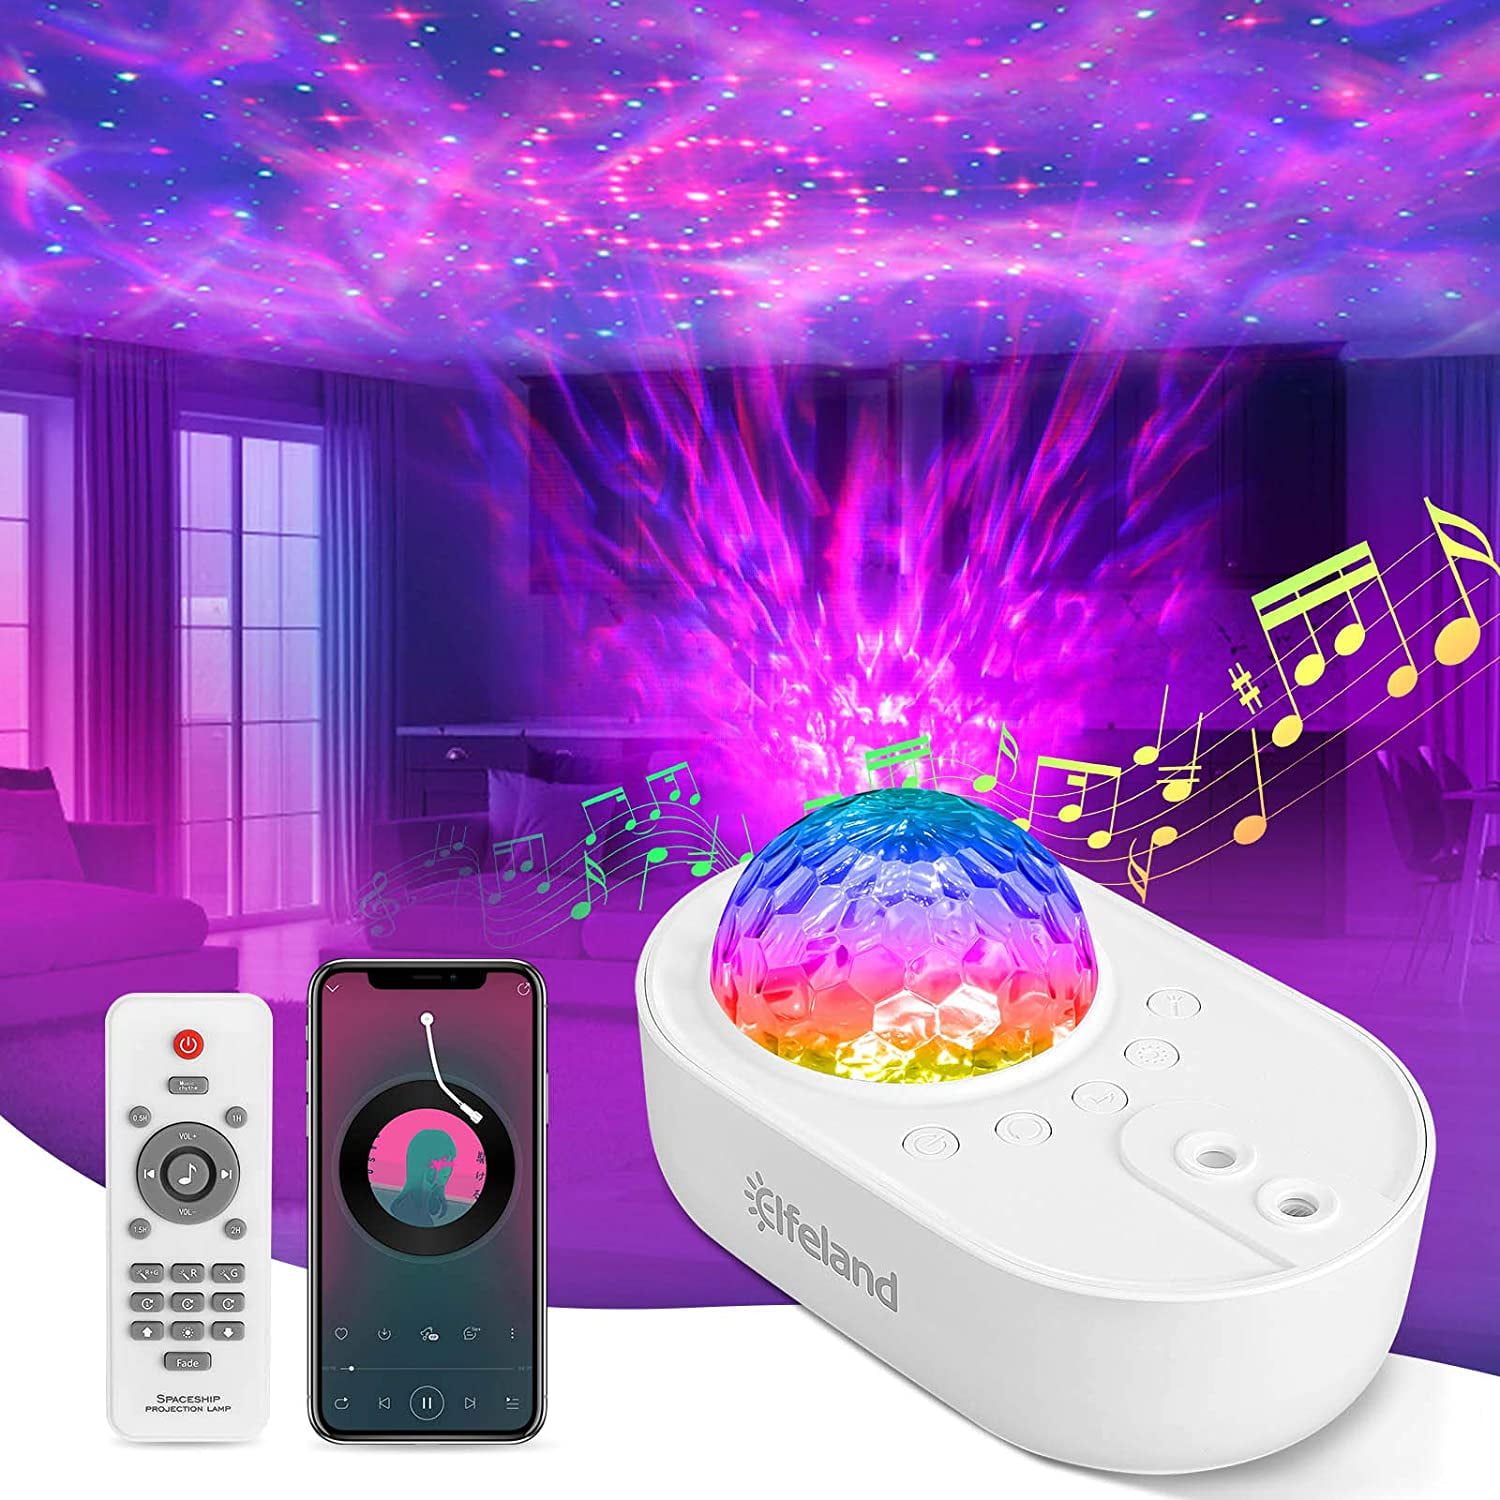 NXENTC LED Star Projector, Galaxy Lighting UFO Light Projector Star Light  Lamp with Remote, Bluetooth Speaker and Timer Night Light Projector for